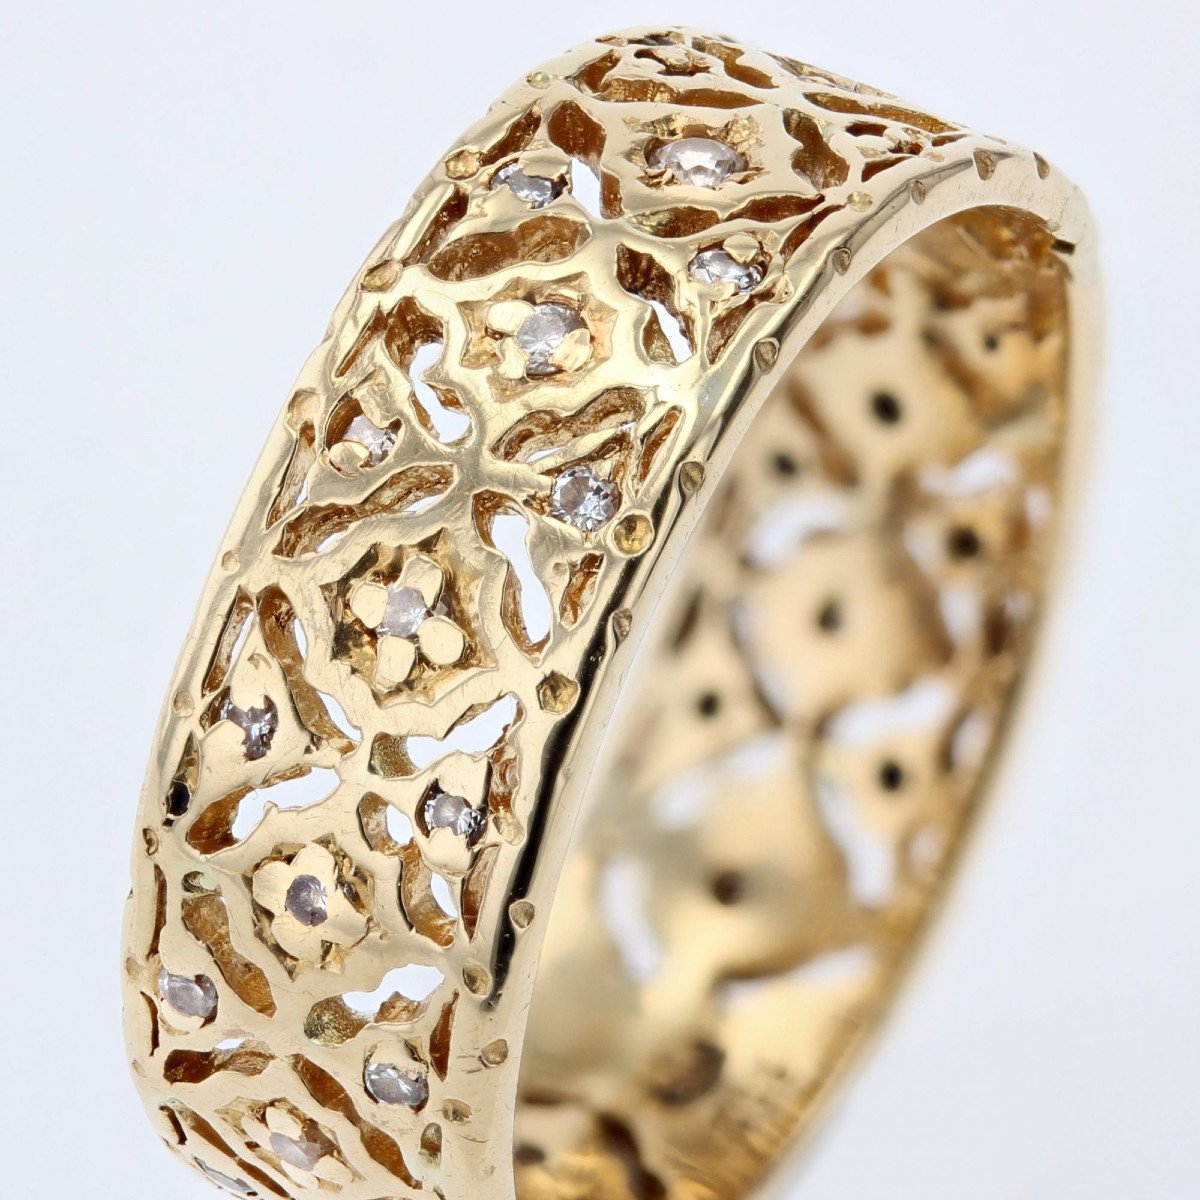 Old Ring In Gold And Diamonds-photo-4